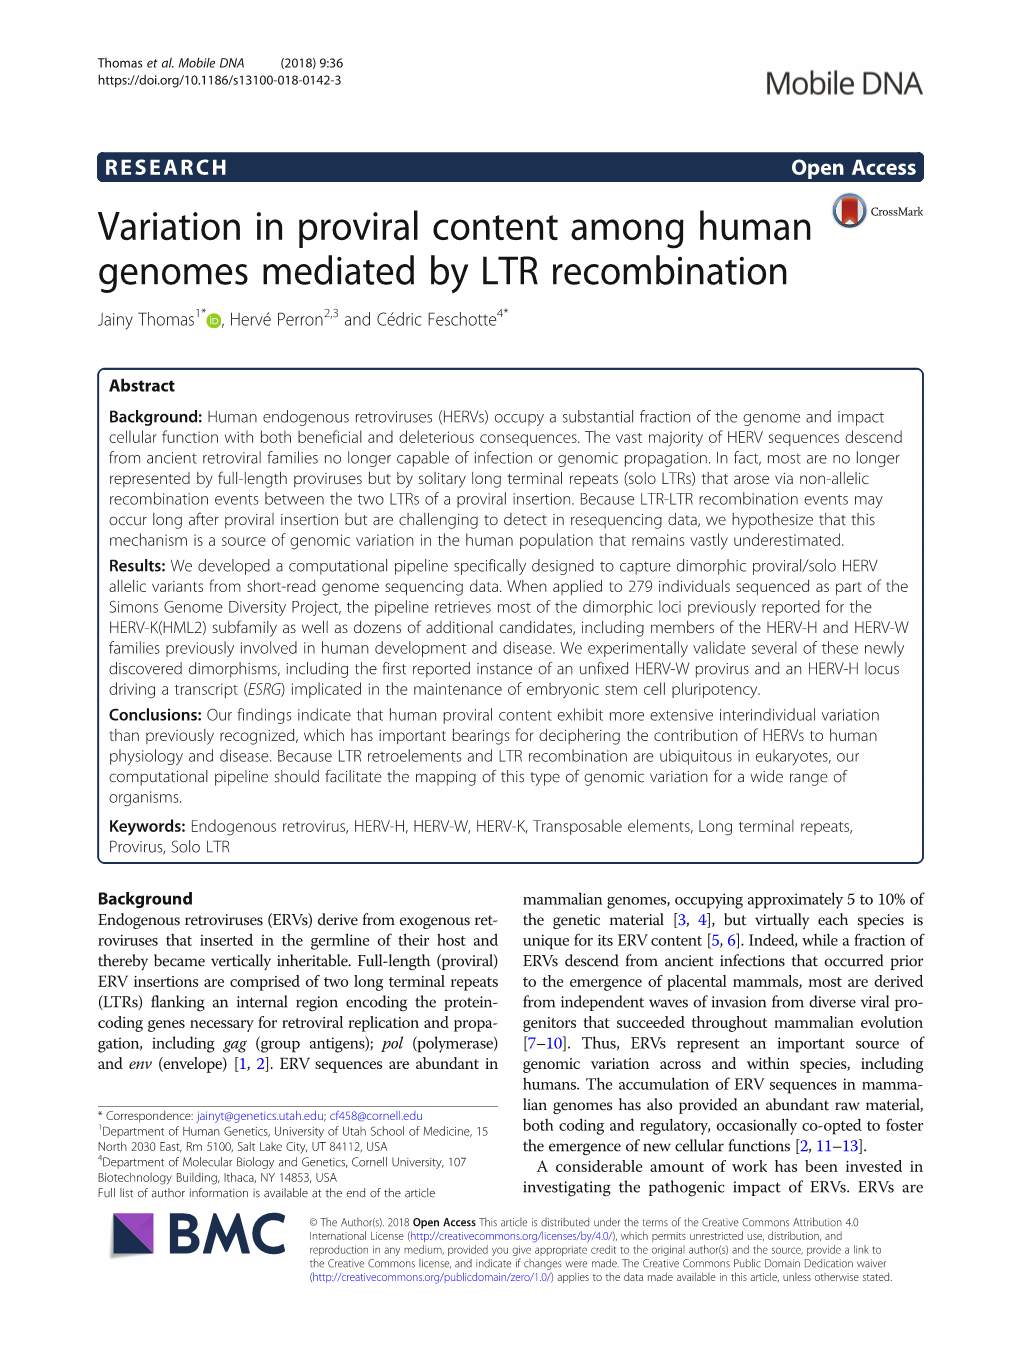 Variation in Proviral Content Among Human Genomes Mediated by LTR Recombination Jainy Thomas1* , Hervé Perron2,3 and Cédric Feschotte4*